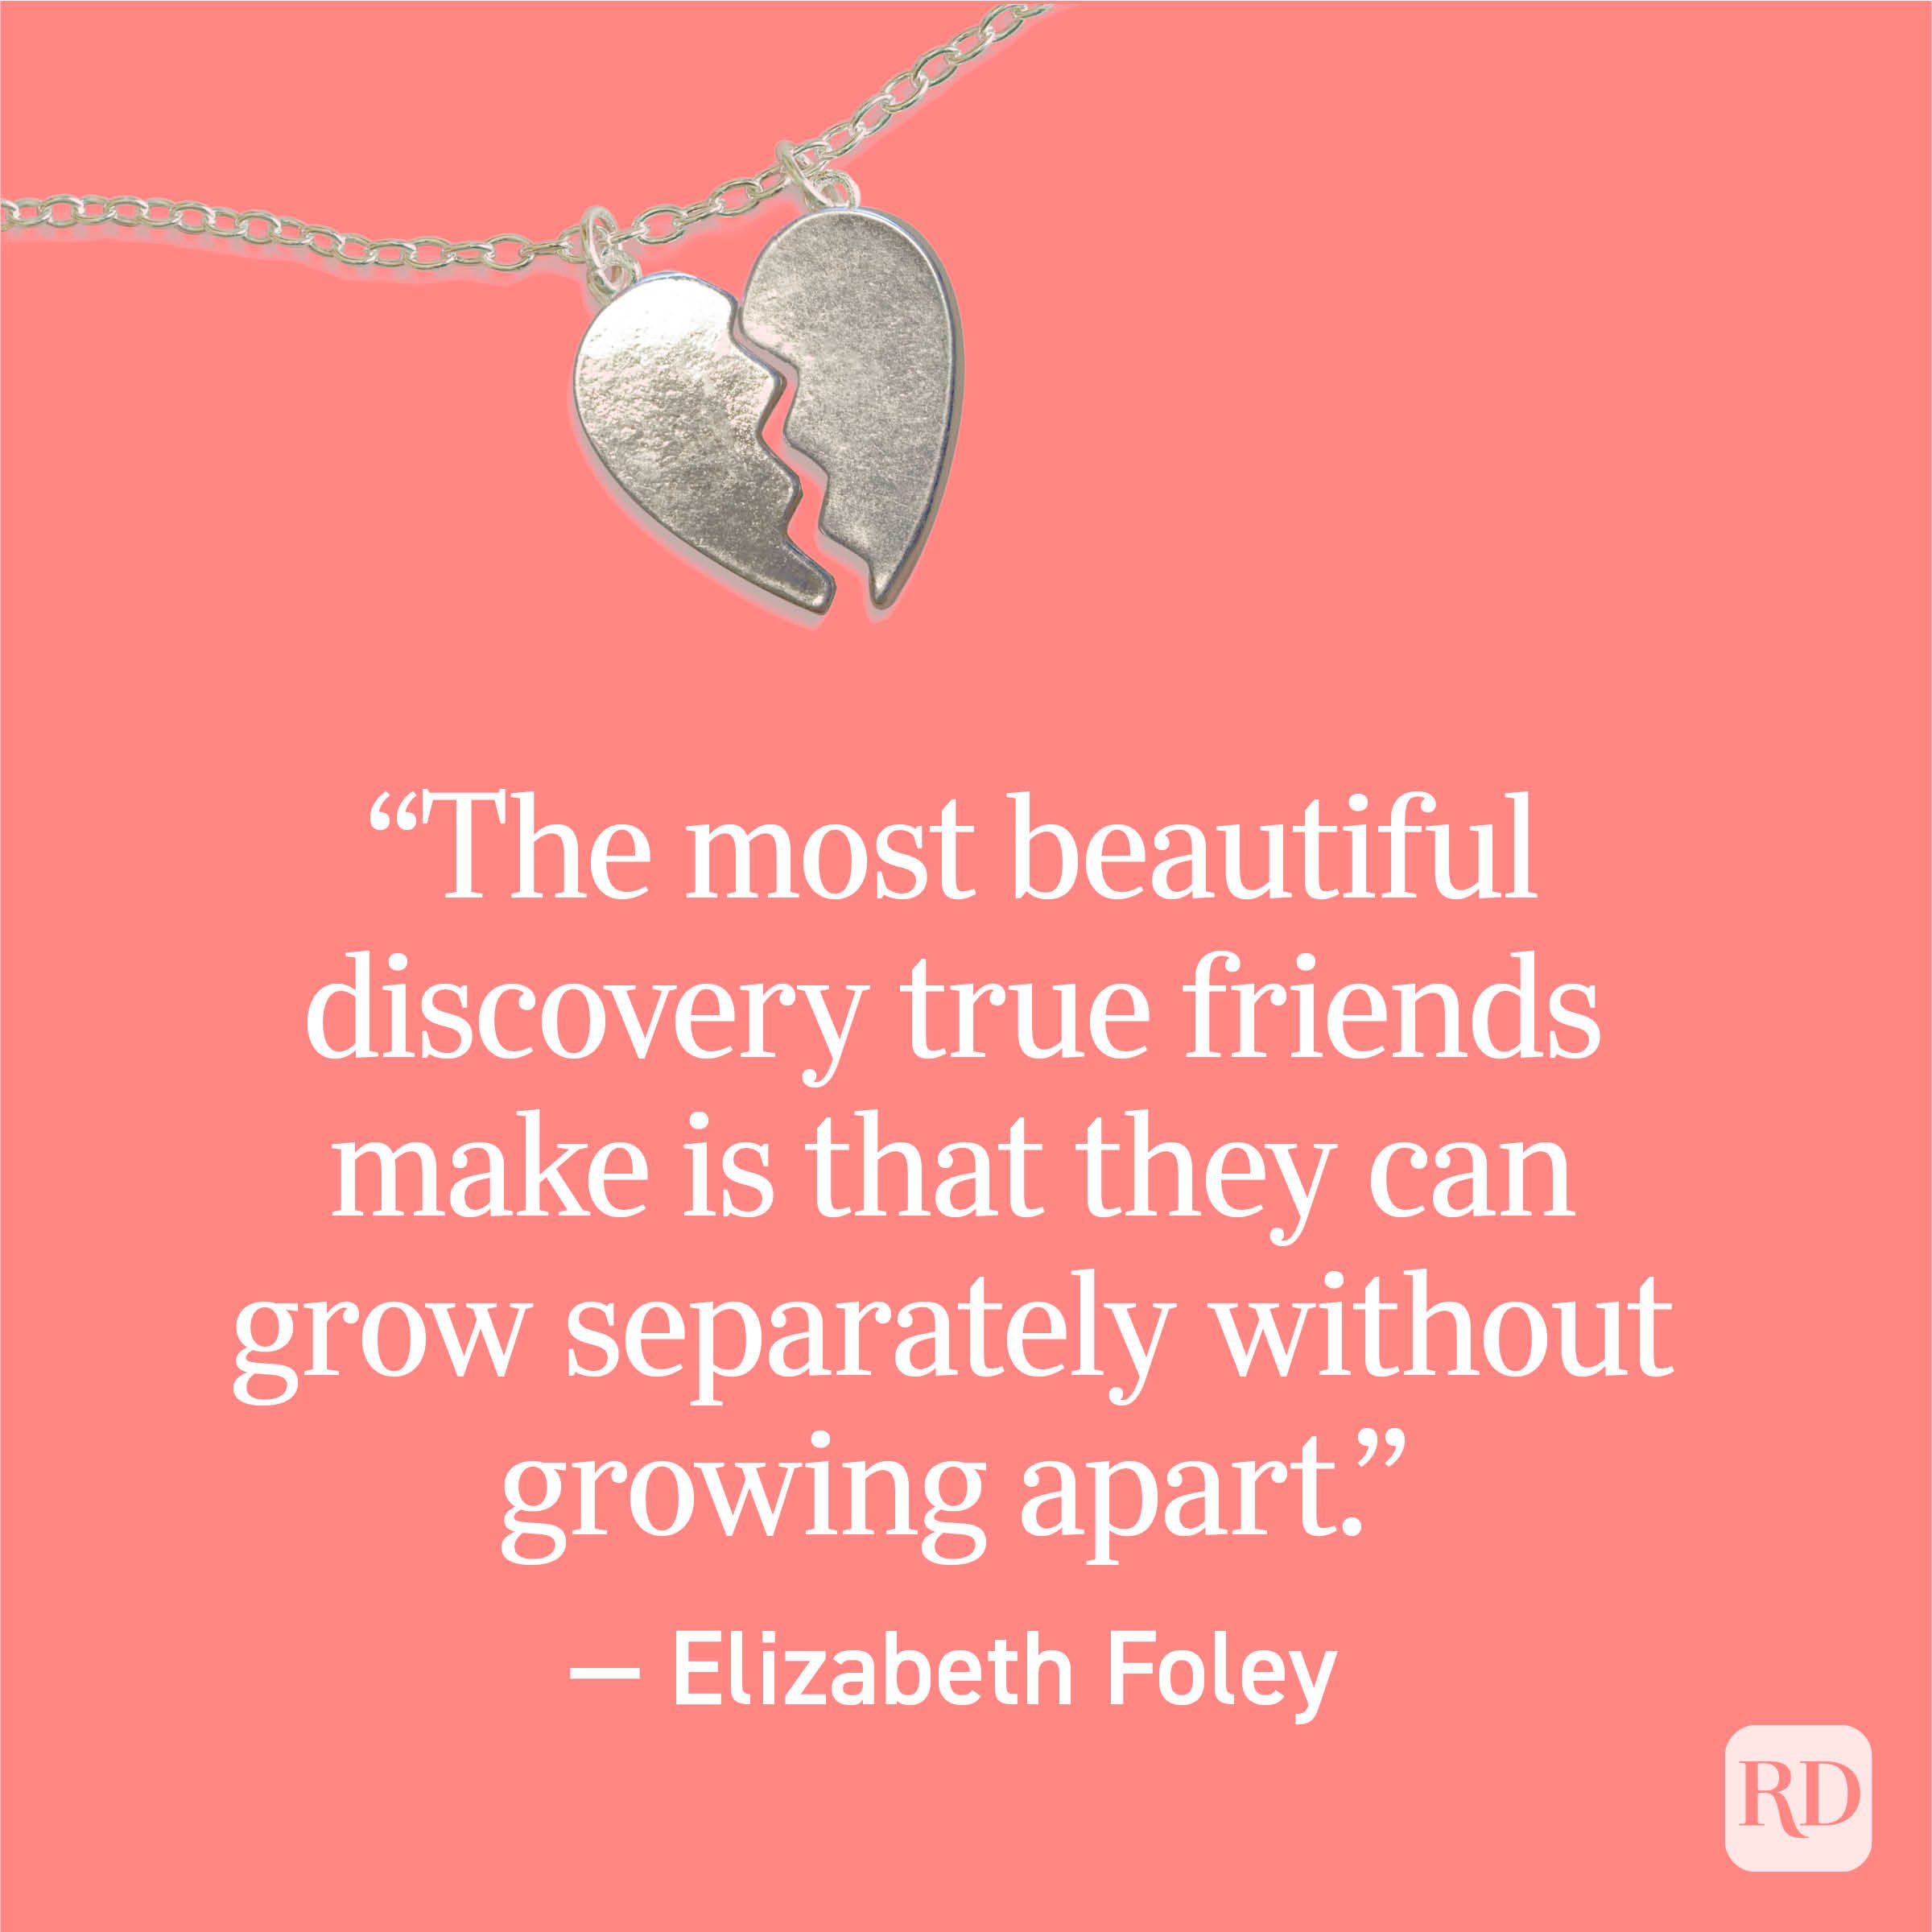 “The most beautiful discovery true friends make is that they can grow separately without growing apart.” — Elizabeth Foley